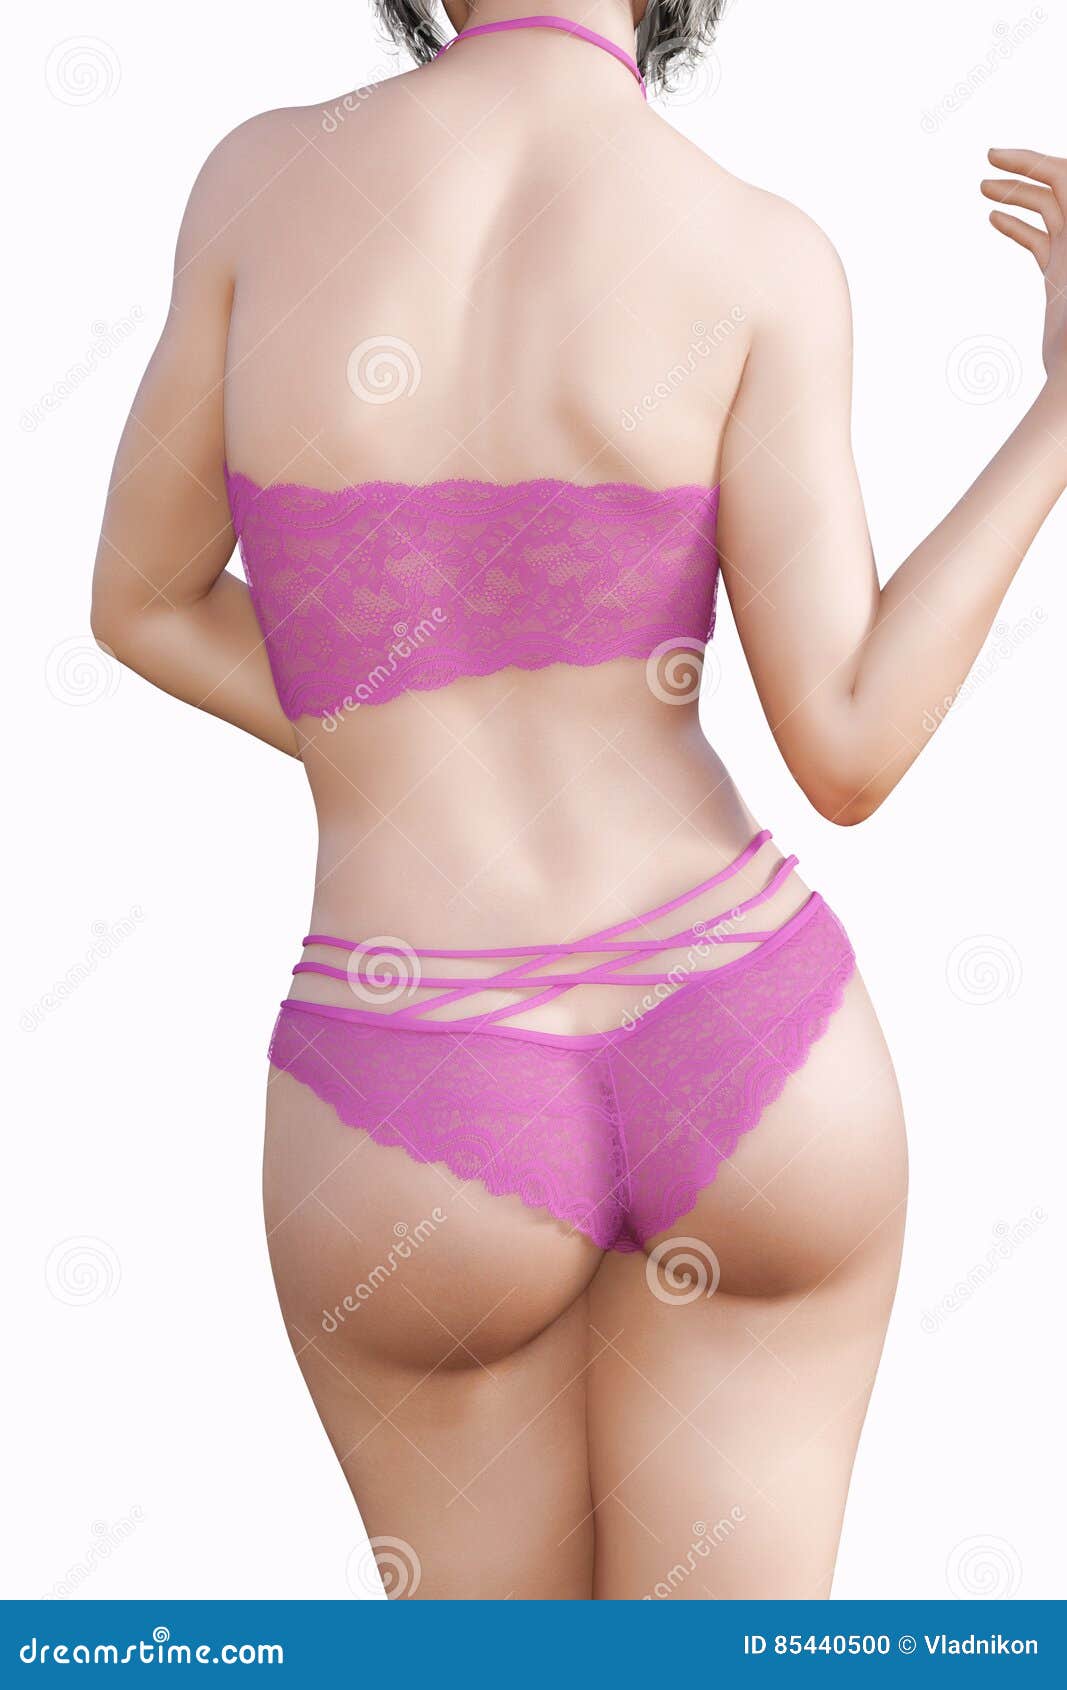 Girl In Lacy Underwear.Transparent Panties And Bra.Extravagant Fashion  Art.Woman Standing Candid Provocative Sexy Pose.Realistic 3D Rendering  Isolate Illustration.Intimate Clothing Collection Stock Photo, Picture and  Royalty Free Image. Image 112022211.